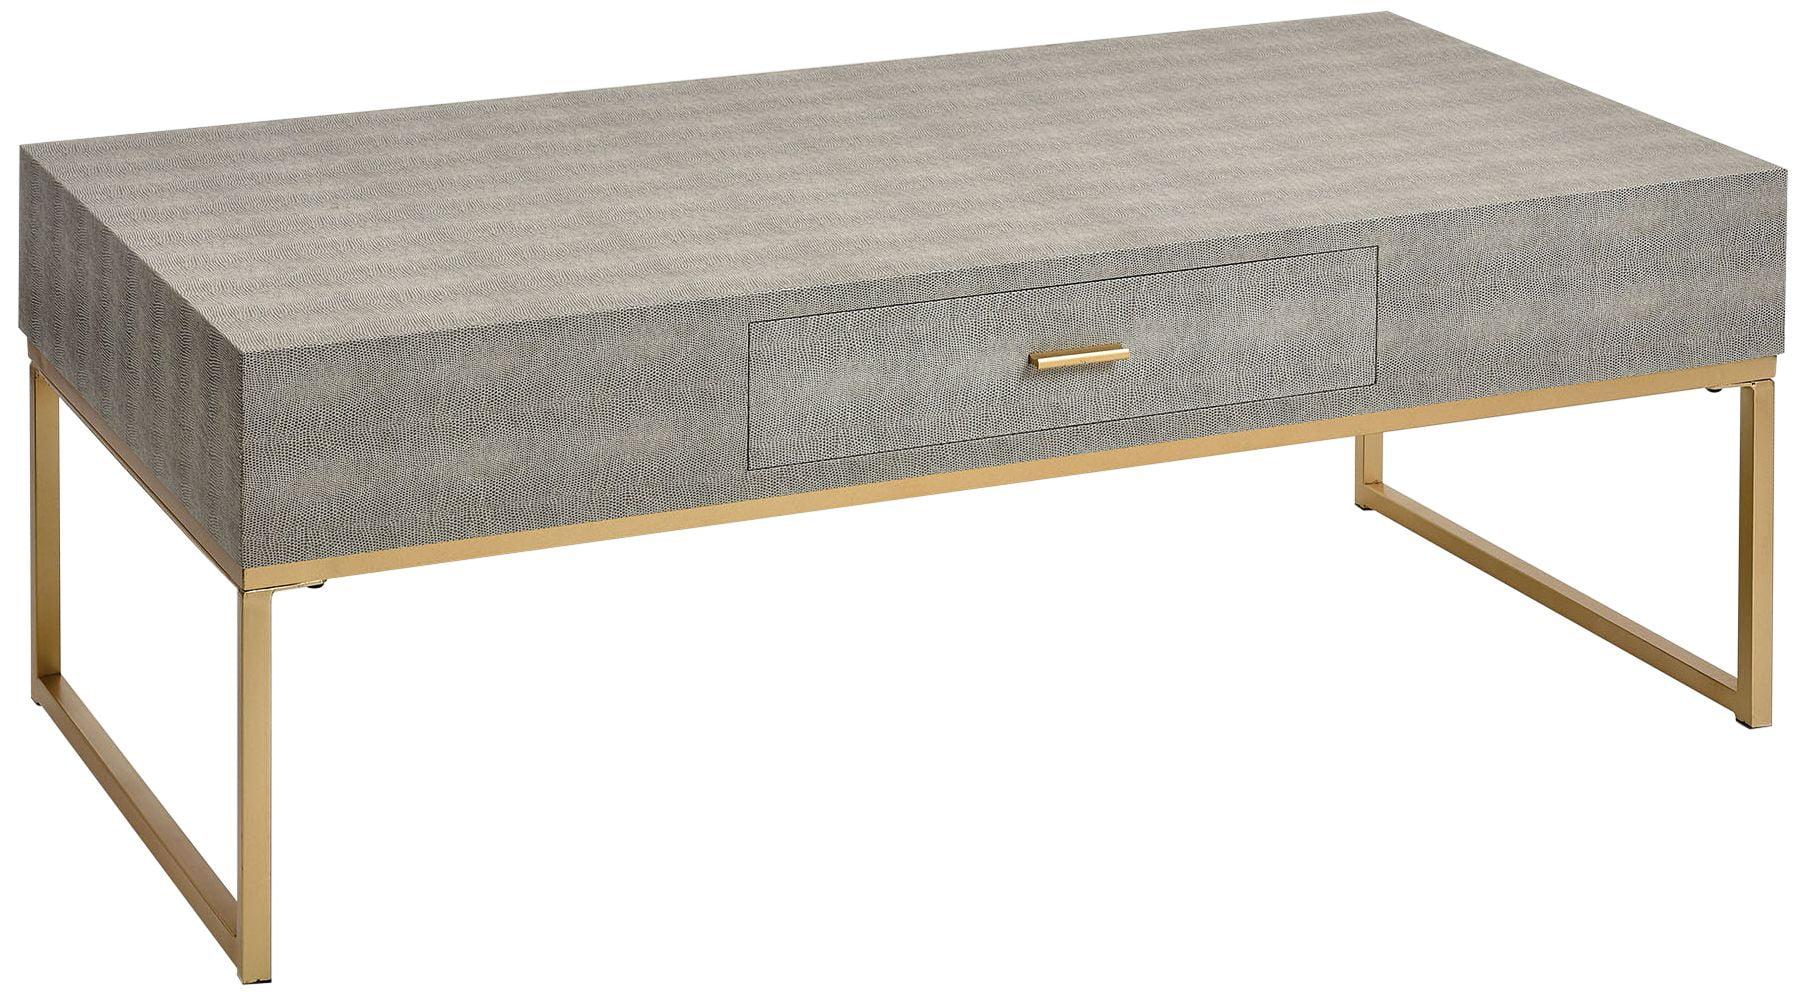 Luxurious Gray Faux Shagreen and Gold Metal Outdoor Coffee Table with Storage